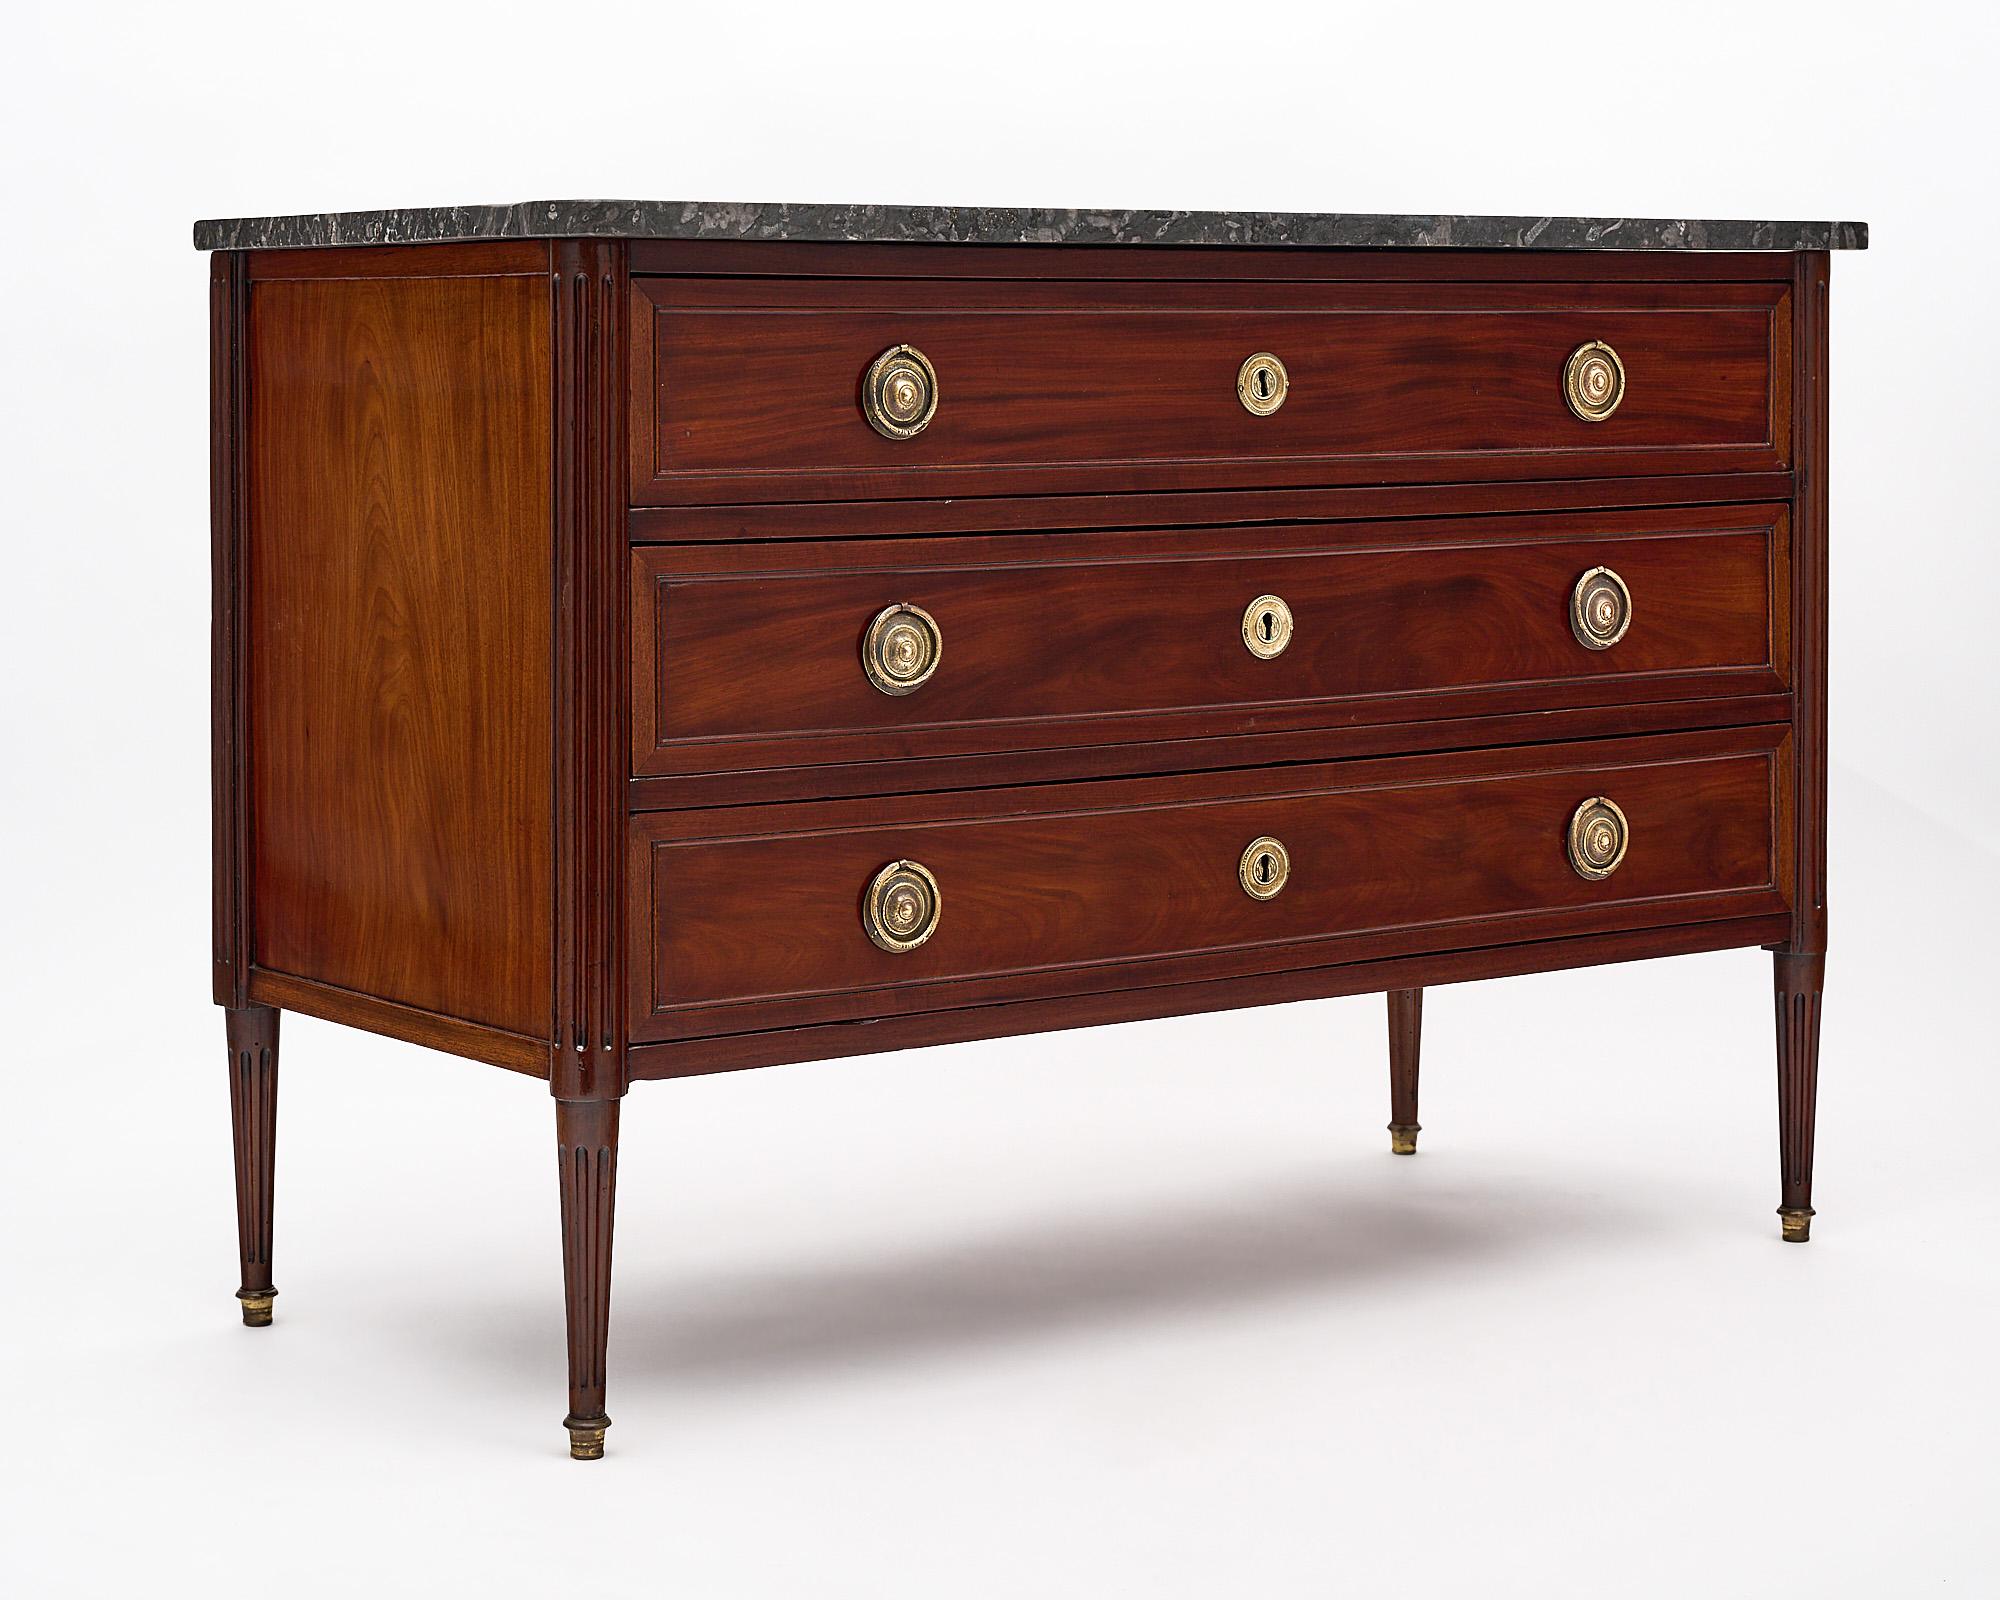 Chest, French, from the Louis XVI period made of mahogany that has been finished with a lustrous French polish. This elegant commode features three dovetailed drawers with finely cast lost wax hardware and an intact, black, veined marble top.